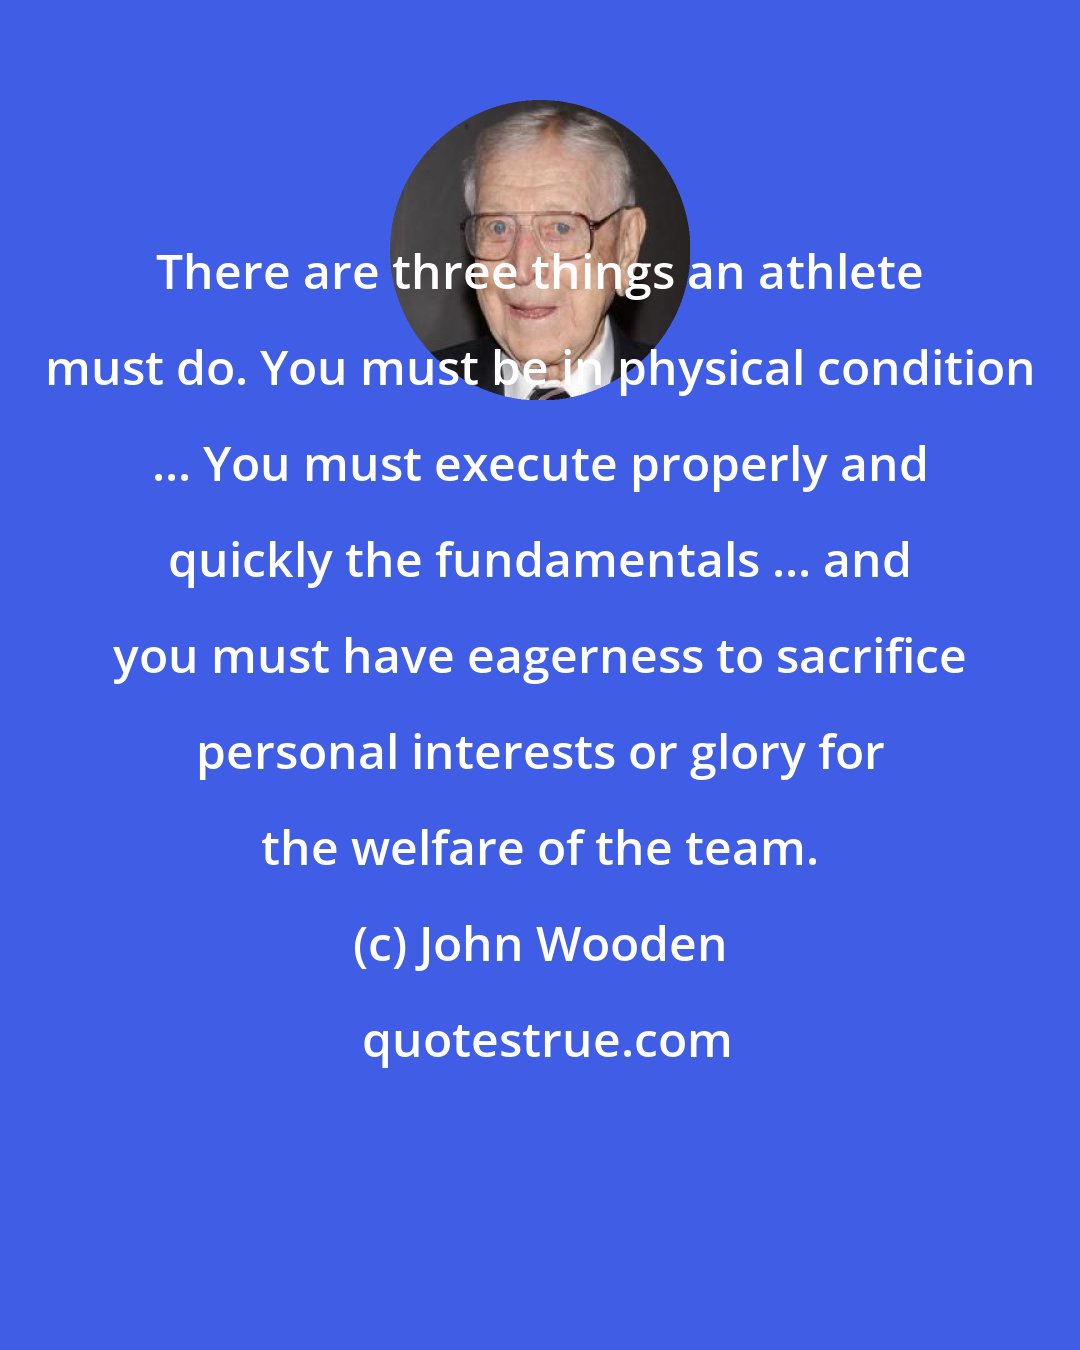 John Wooden: There are three things an athlete must do. You must be in physical condition ... You must execute properly and quickly the fundamentals ... and you must have eagerness to sacrifice personal interests or glory for the welfare of the team.